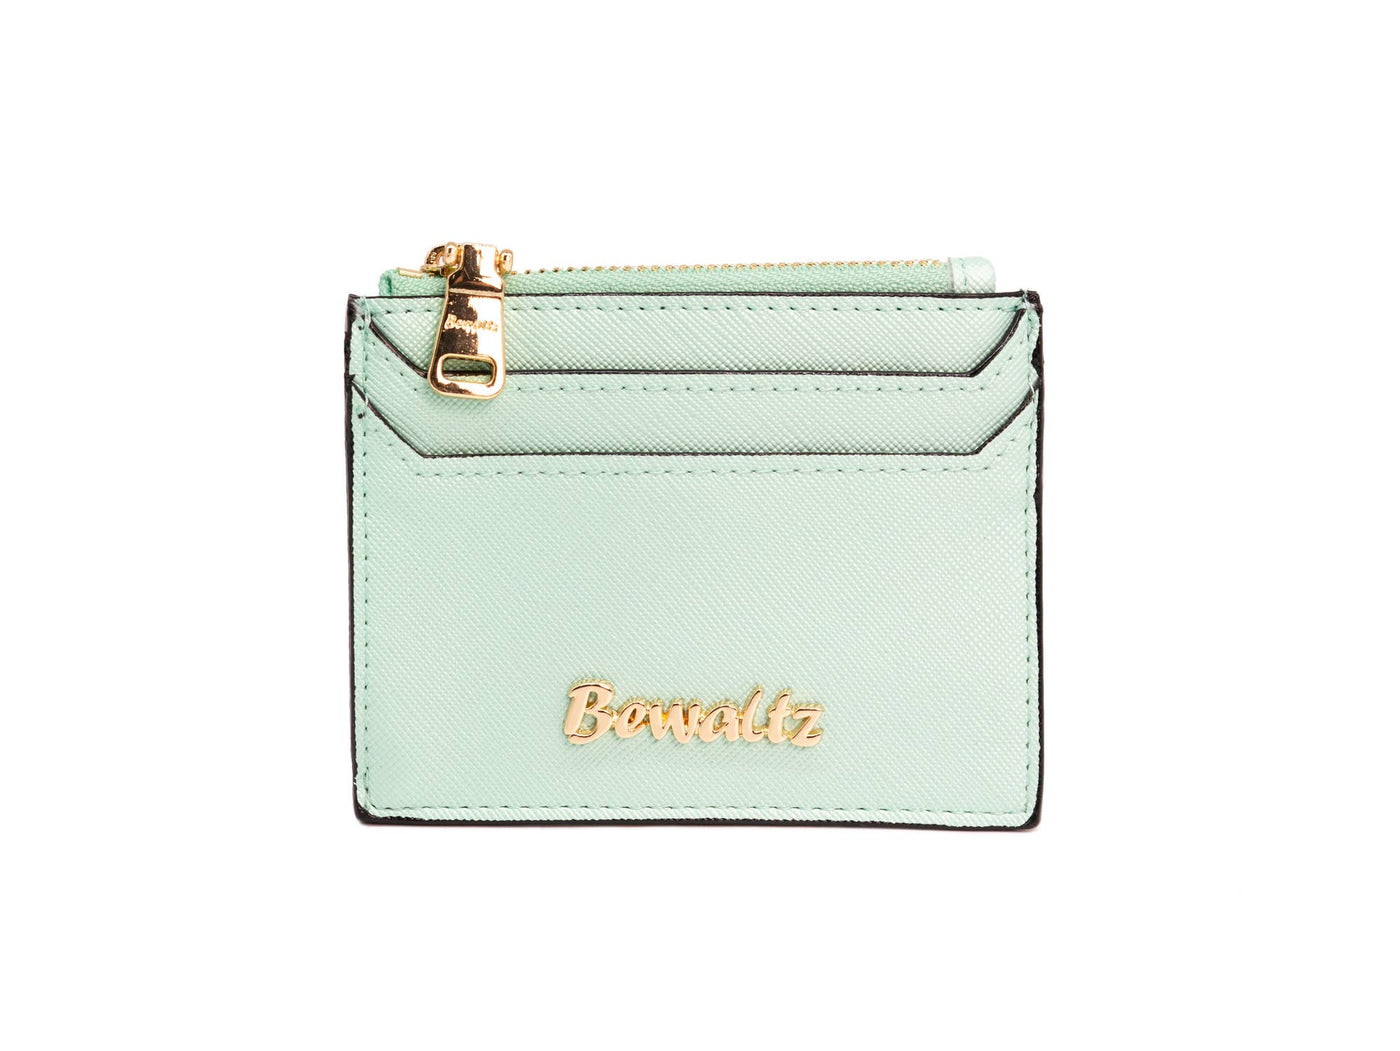 Pastel Keychain Card Holder- Click to Pick Your Color!